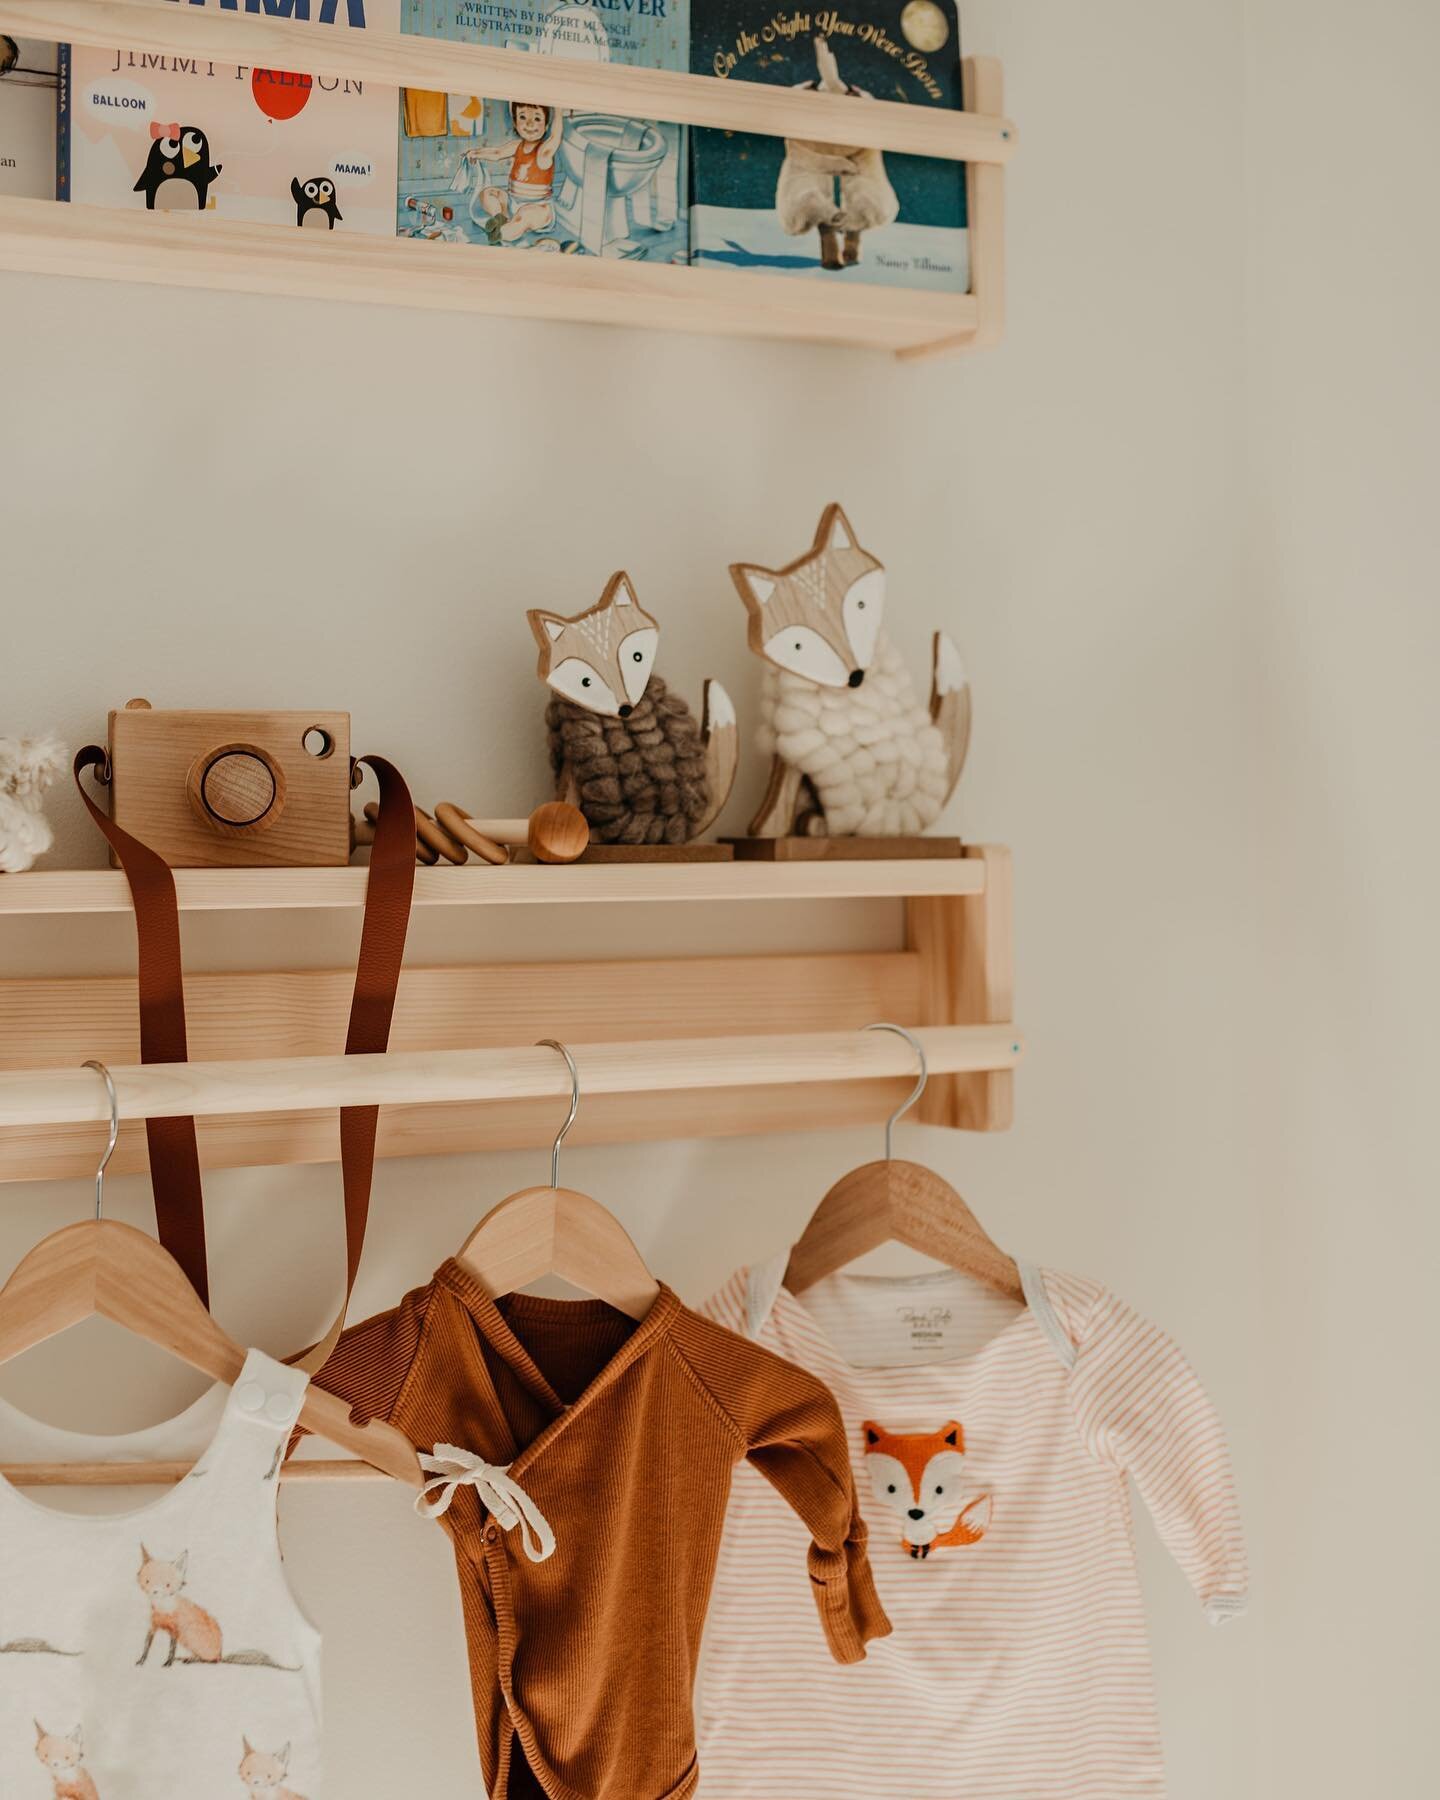 Never want to forget those nursery details.  I had my first baby over 16 years ago, before Pinterest, just as Facebook was coming into the world. Without a natural talent for decorating and barely any money, my Susannah&rsquo;s nursery was pretty pat